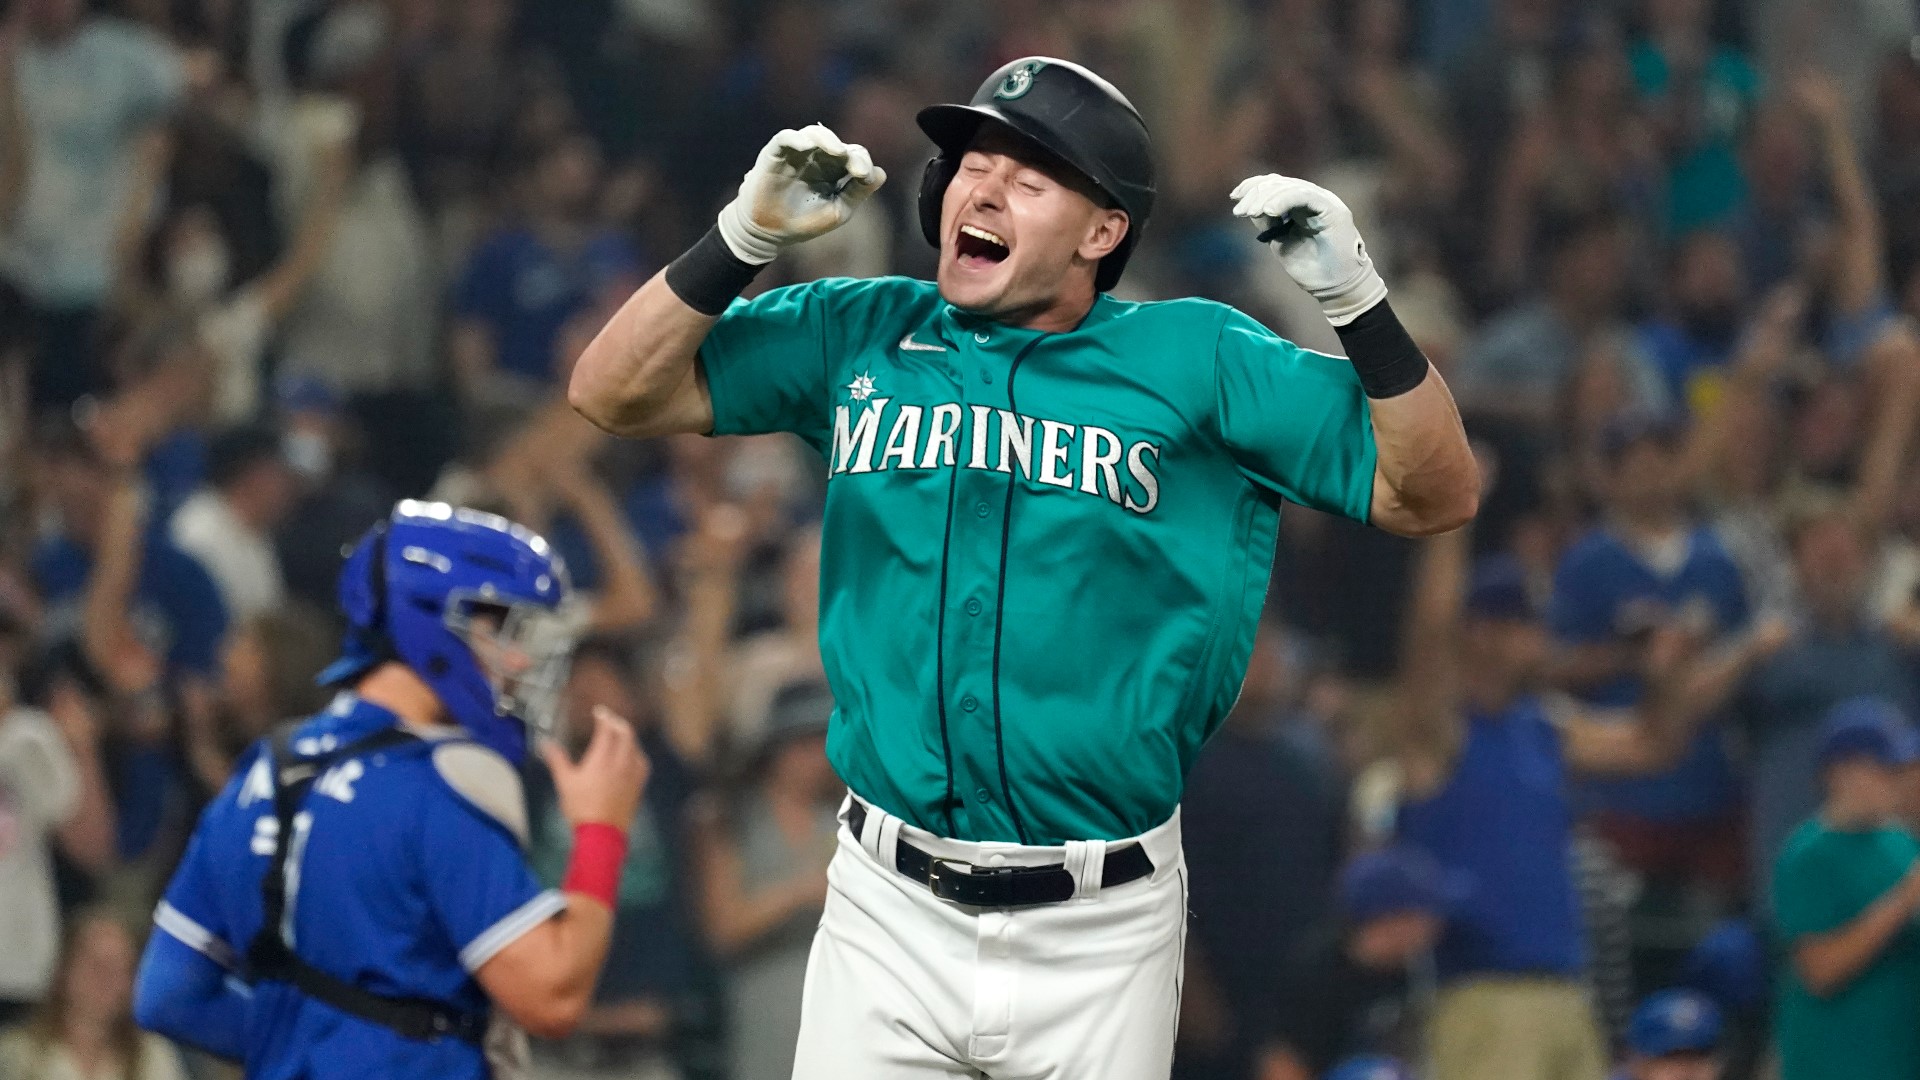 The Mariners' home opener is April 15th against the Houston Astros